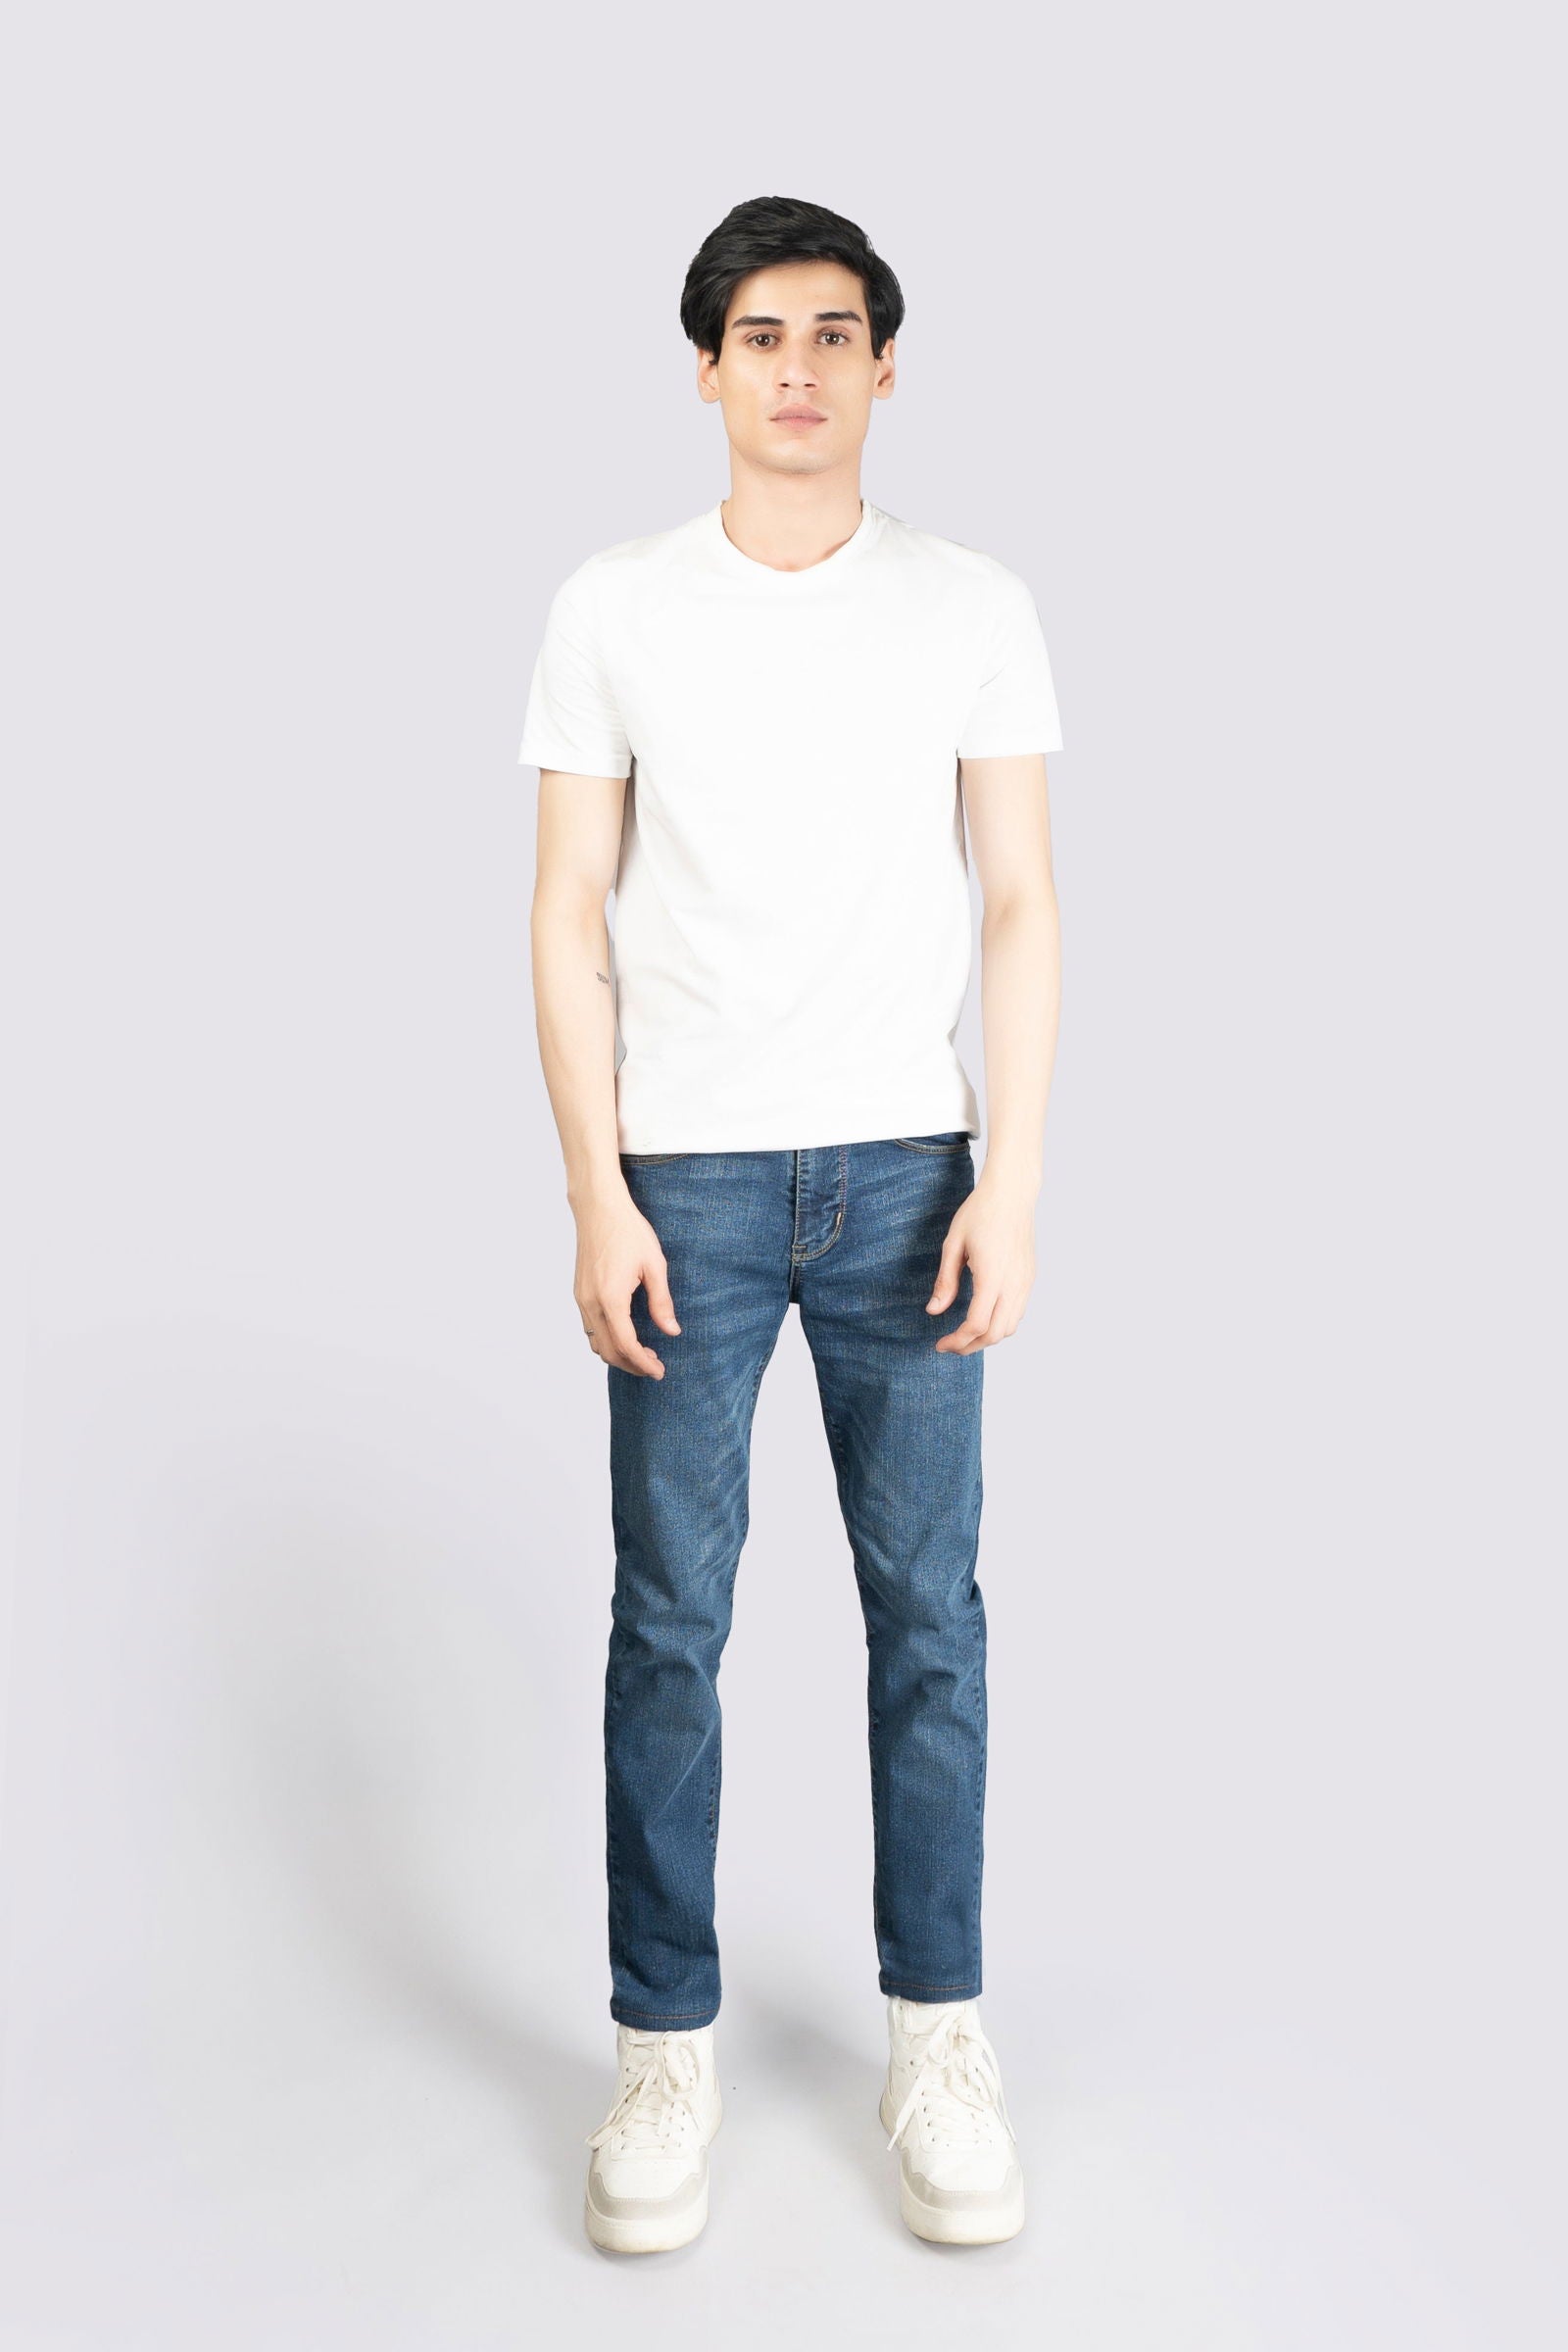 Power Stretch Denim Mid Blue Jeans - The Axis Clothing